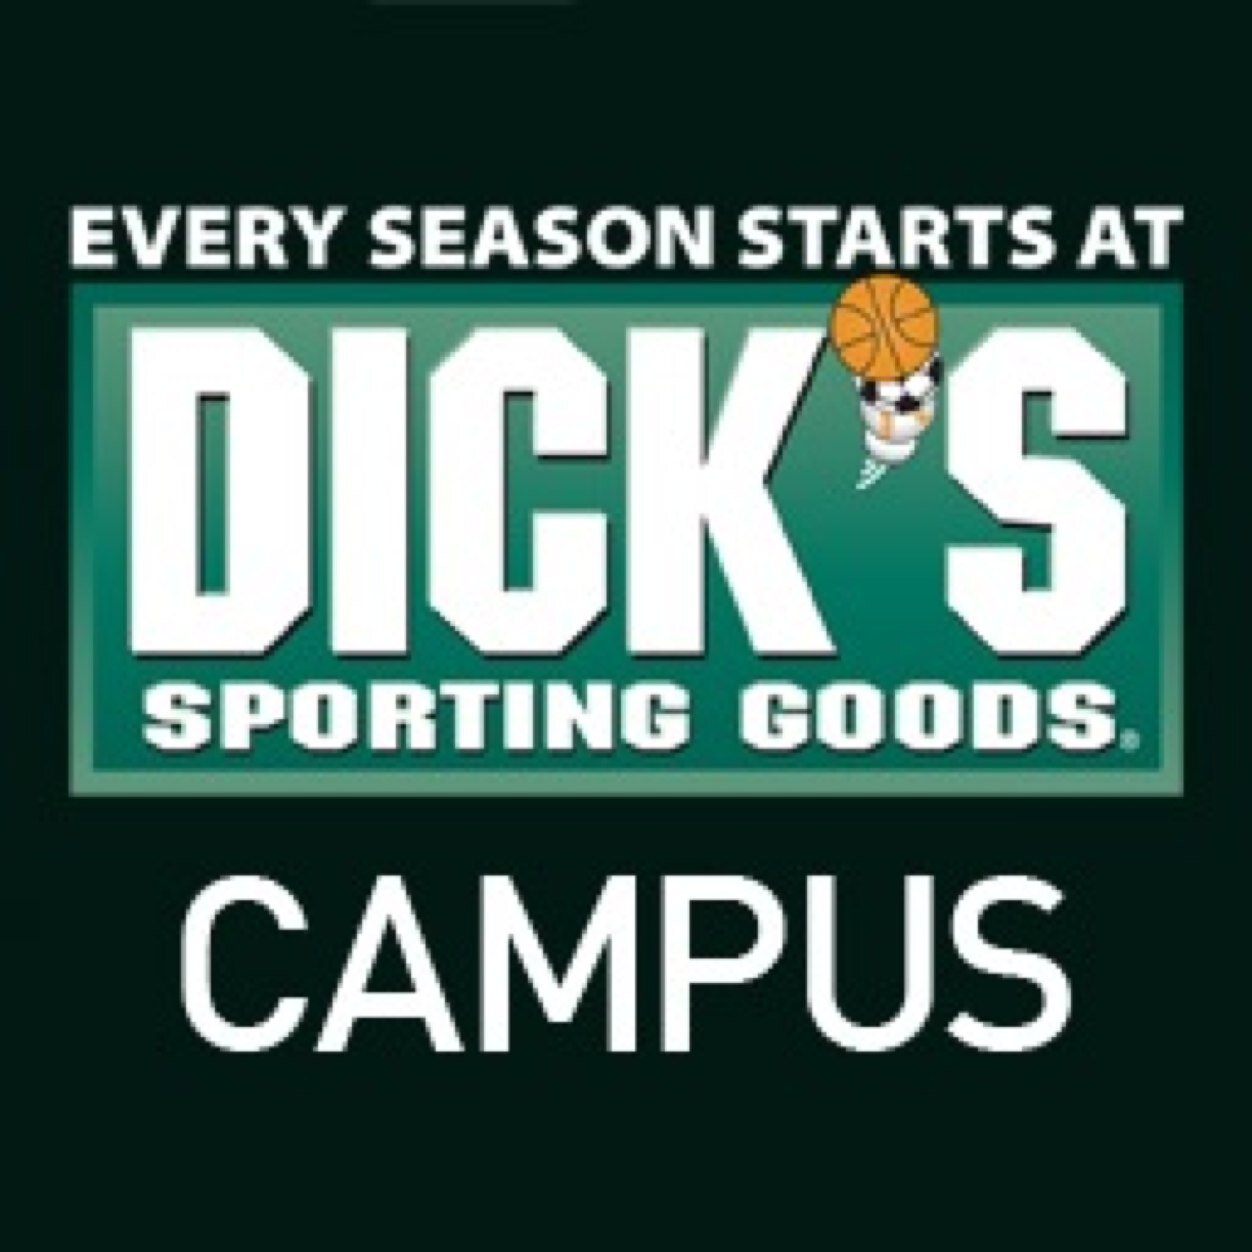 Providing updates from the DICK'S Sporting Goods' University Relations Recruiters #DSGcampus